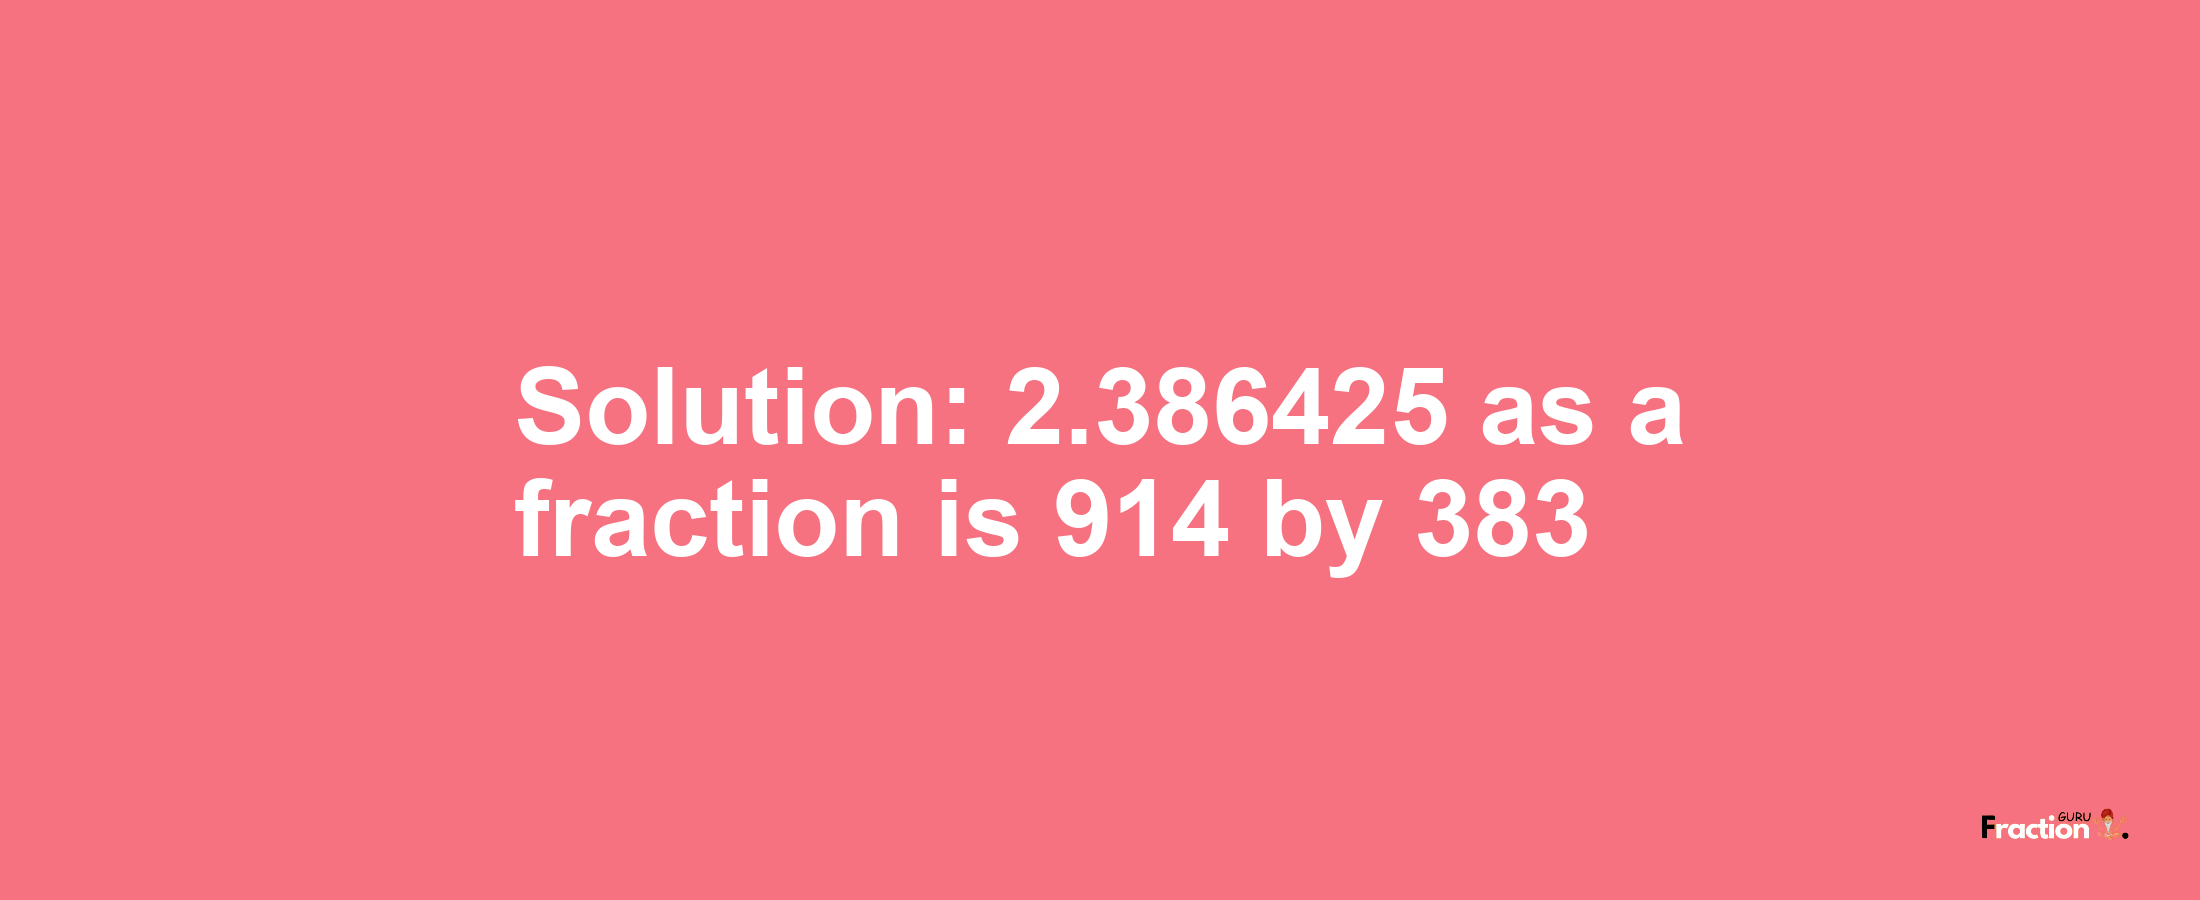 Solution:2.386425 as a fraction is 914/383